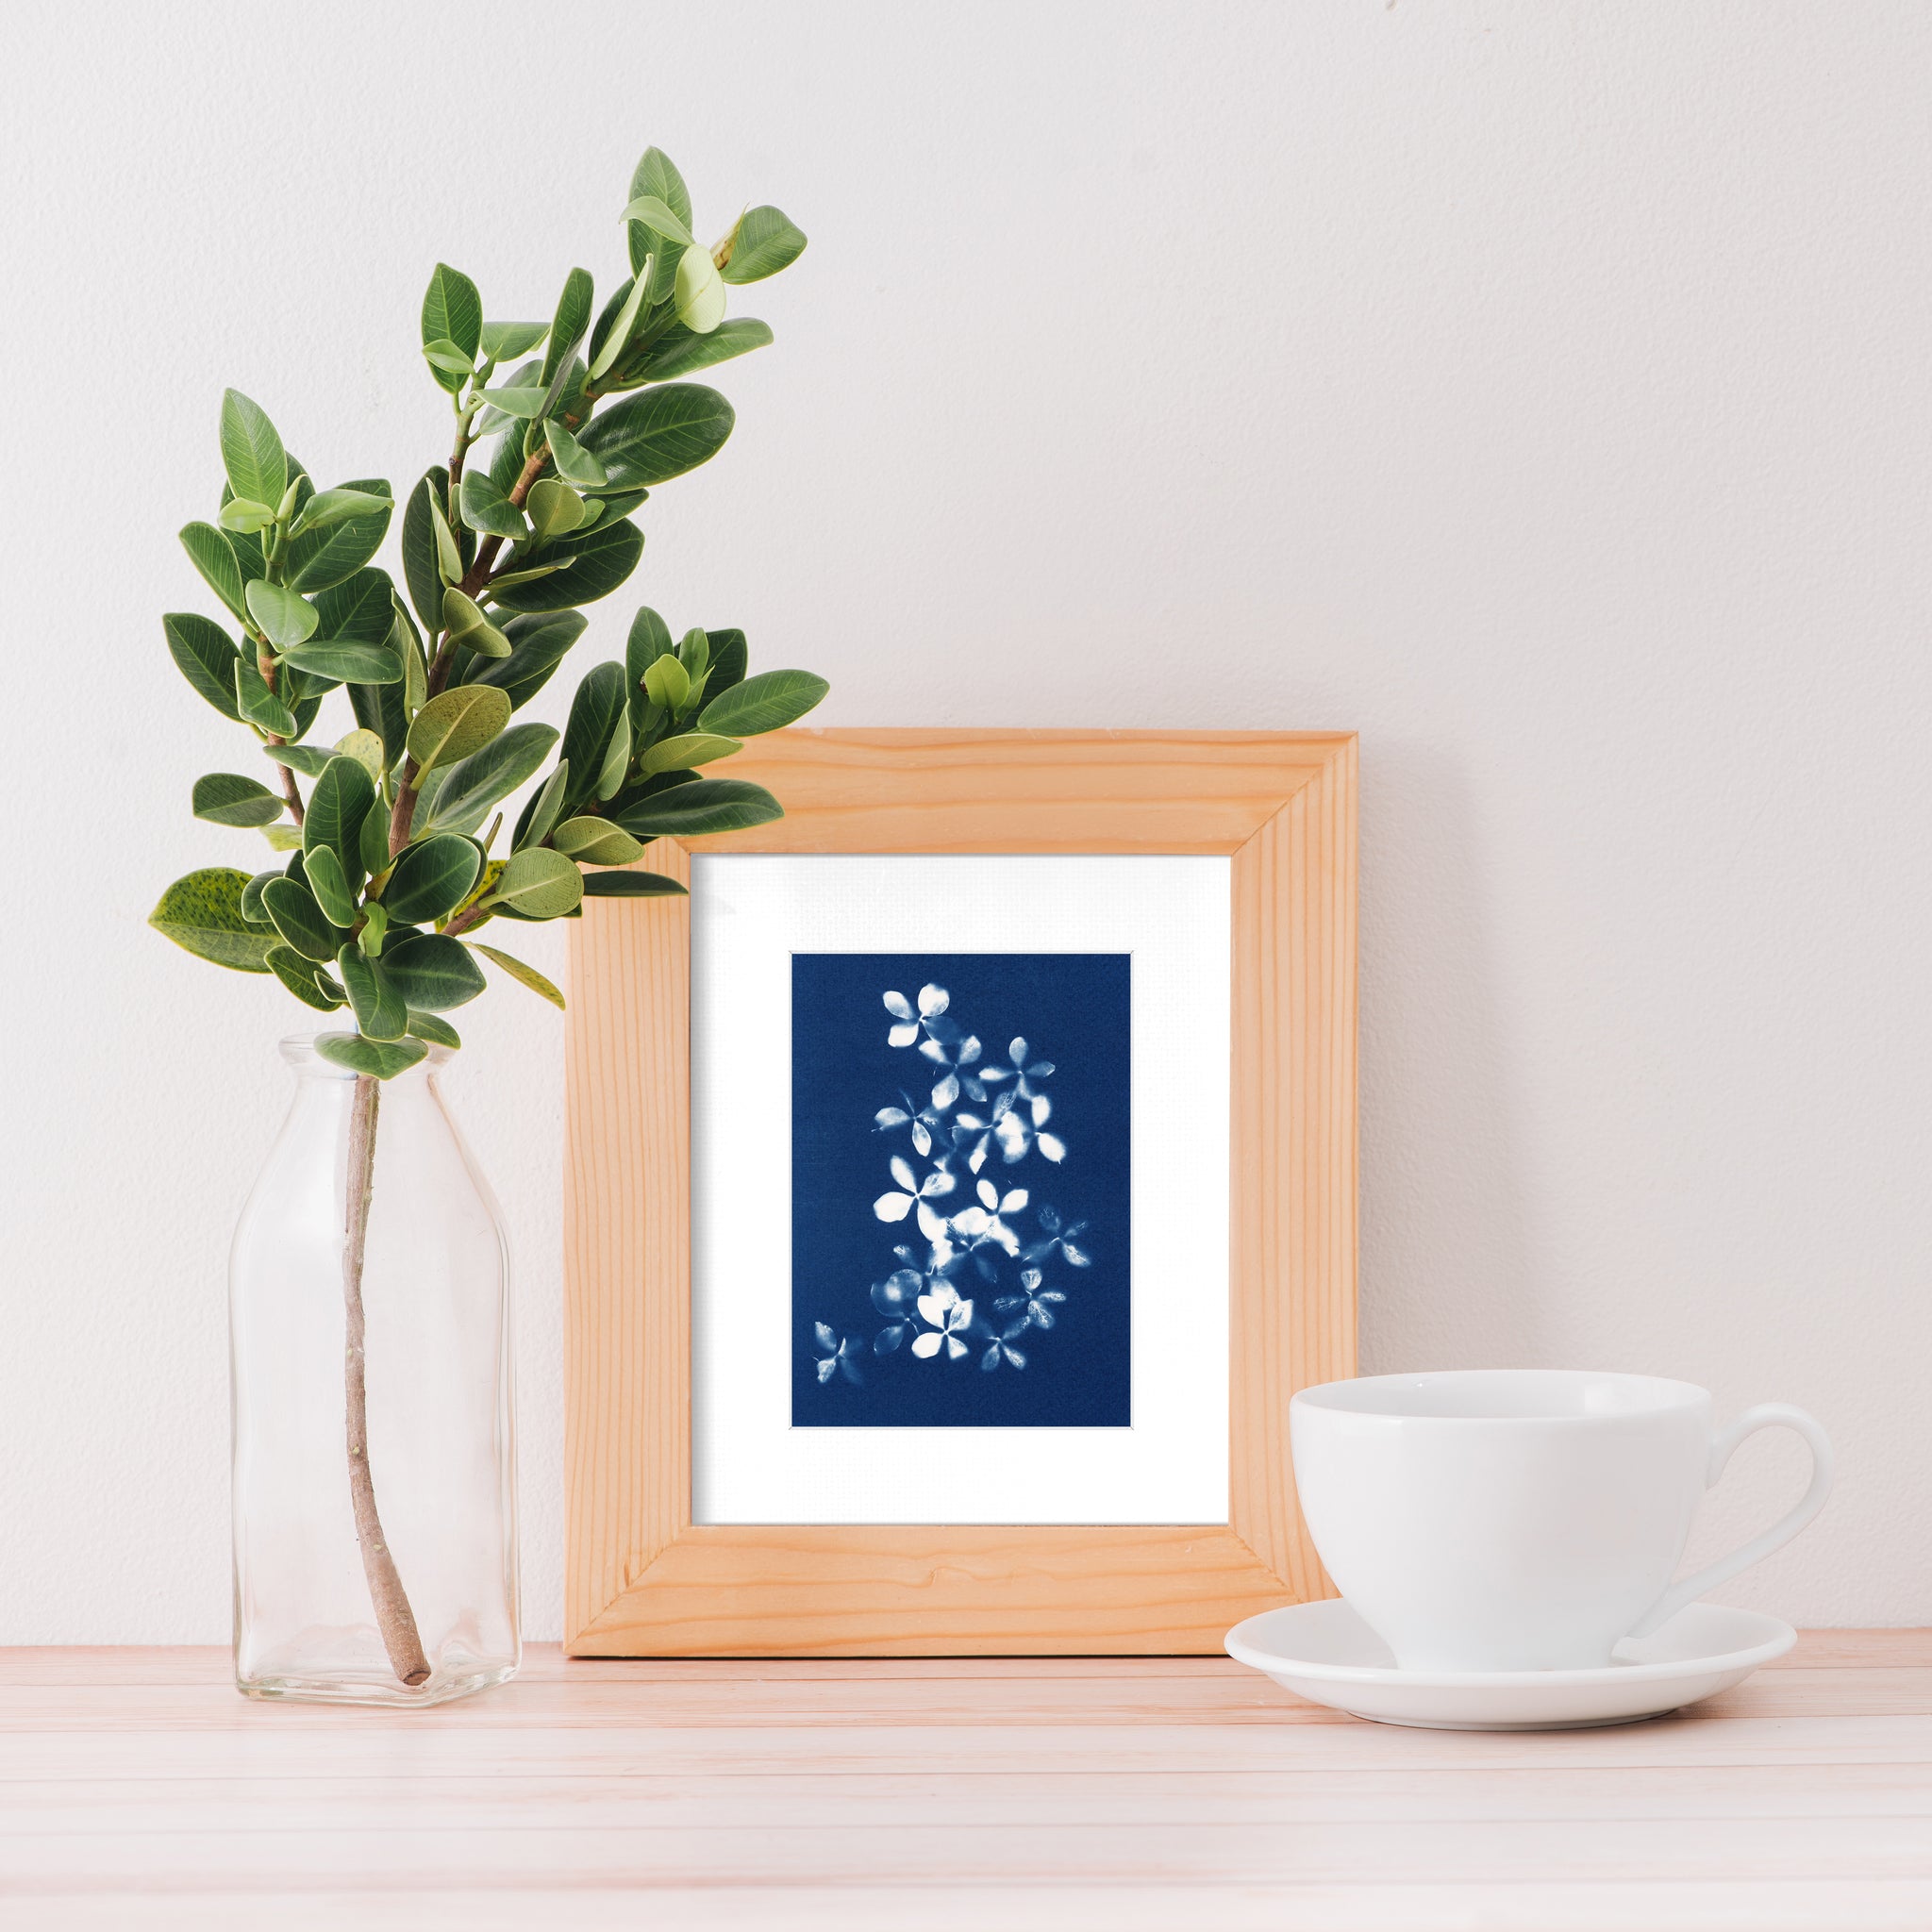 frame with blue cyanotype art print by Jo Thomson on a side table with coffee cup and leaf stem in a bottle vase